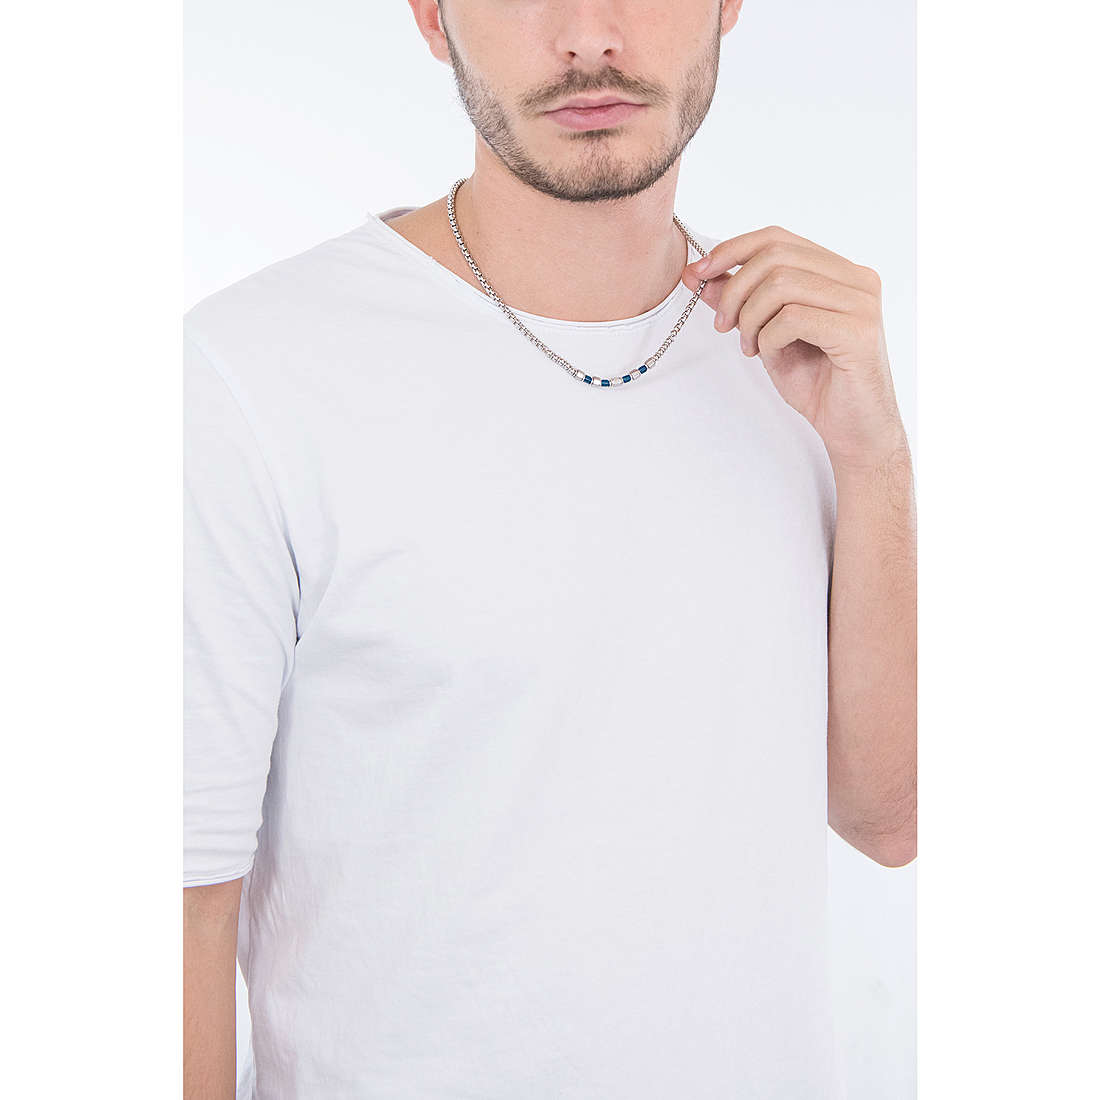 Luca Barra necklaces man CL226 wearing